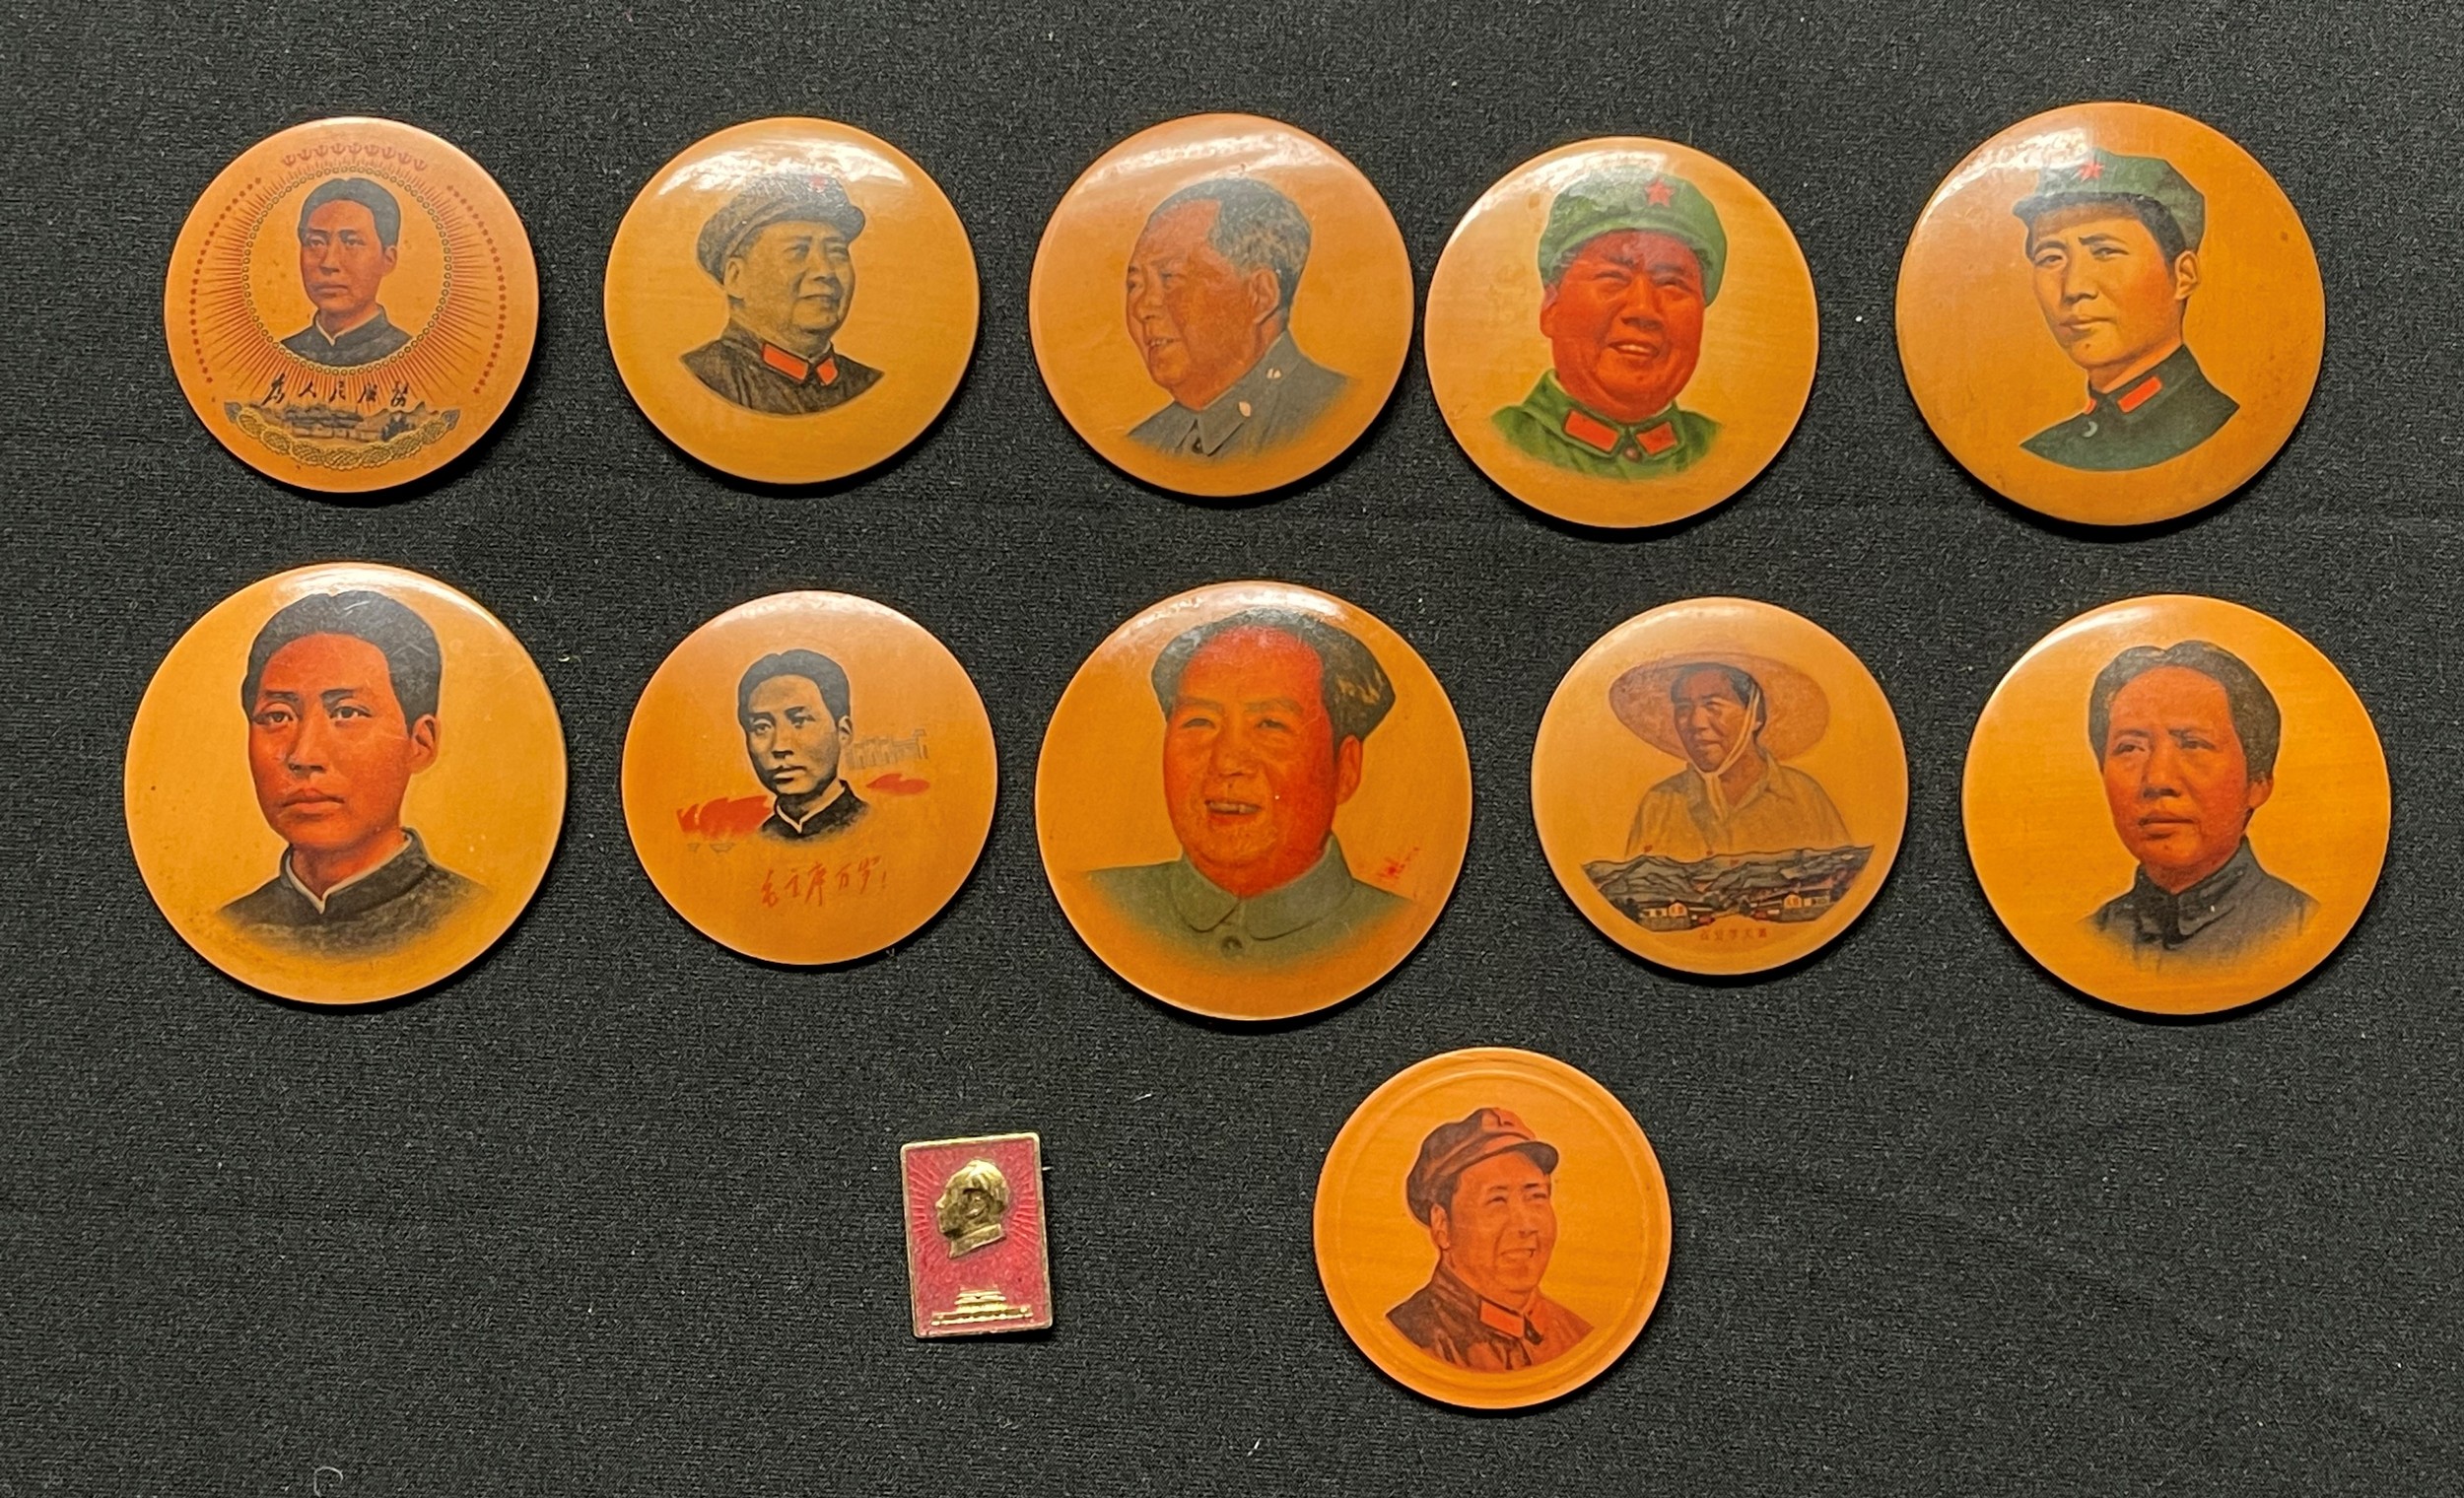 Communist Peoples Republic of China collection of Bamboo printed lapel badges featuring Chairman Mao